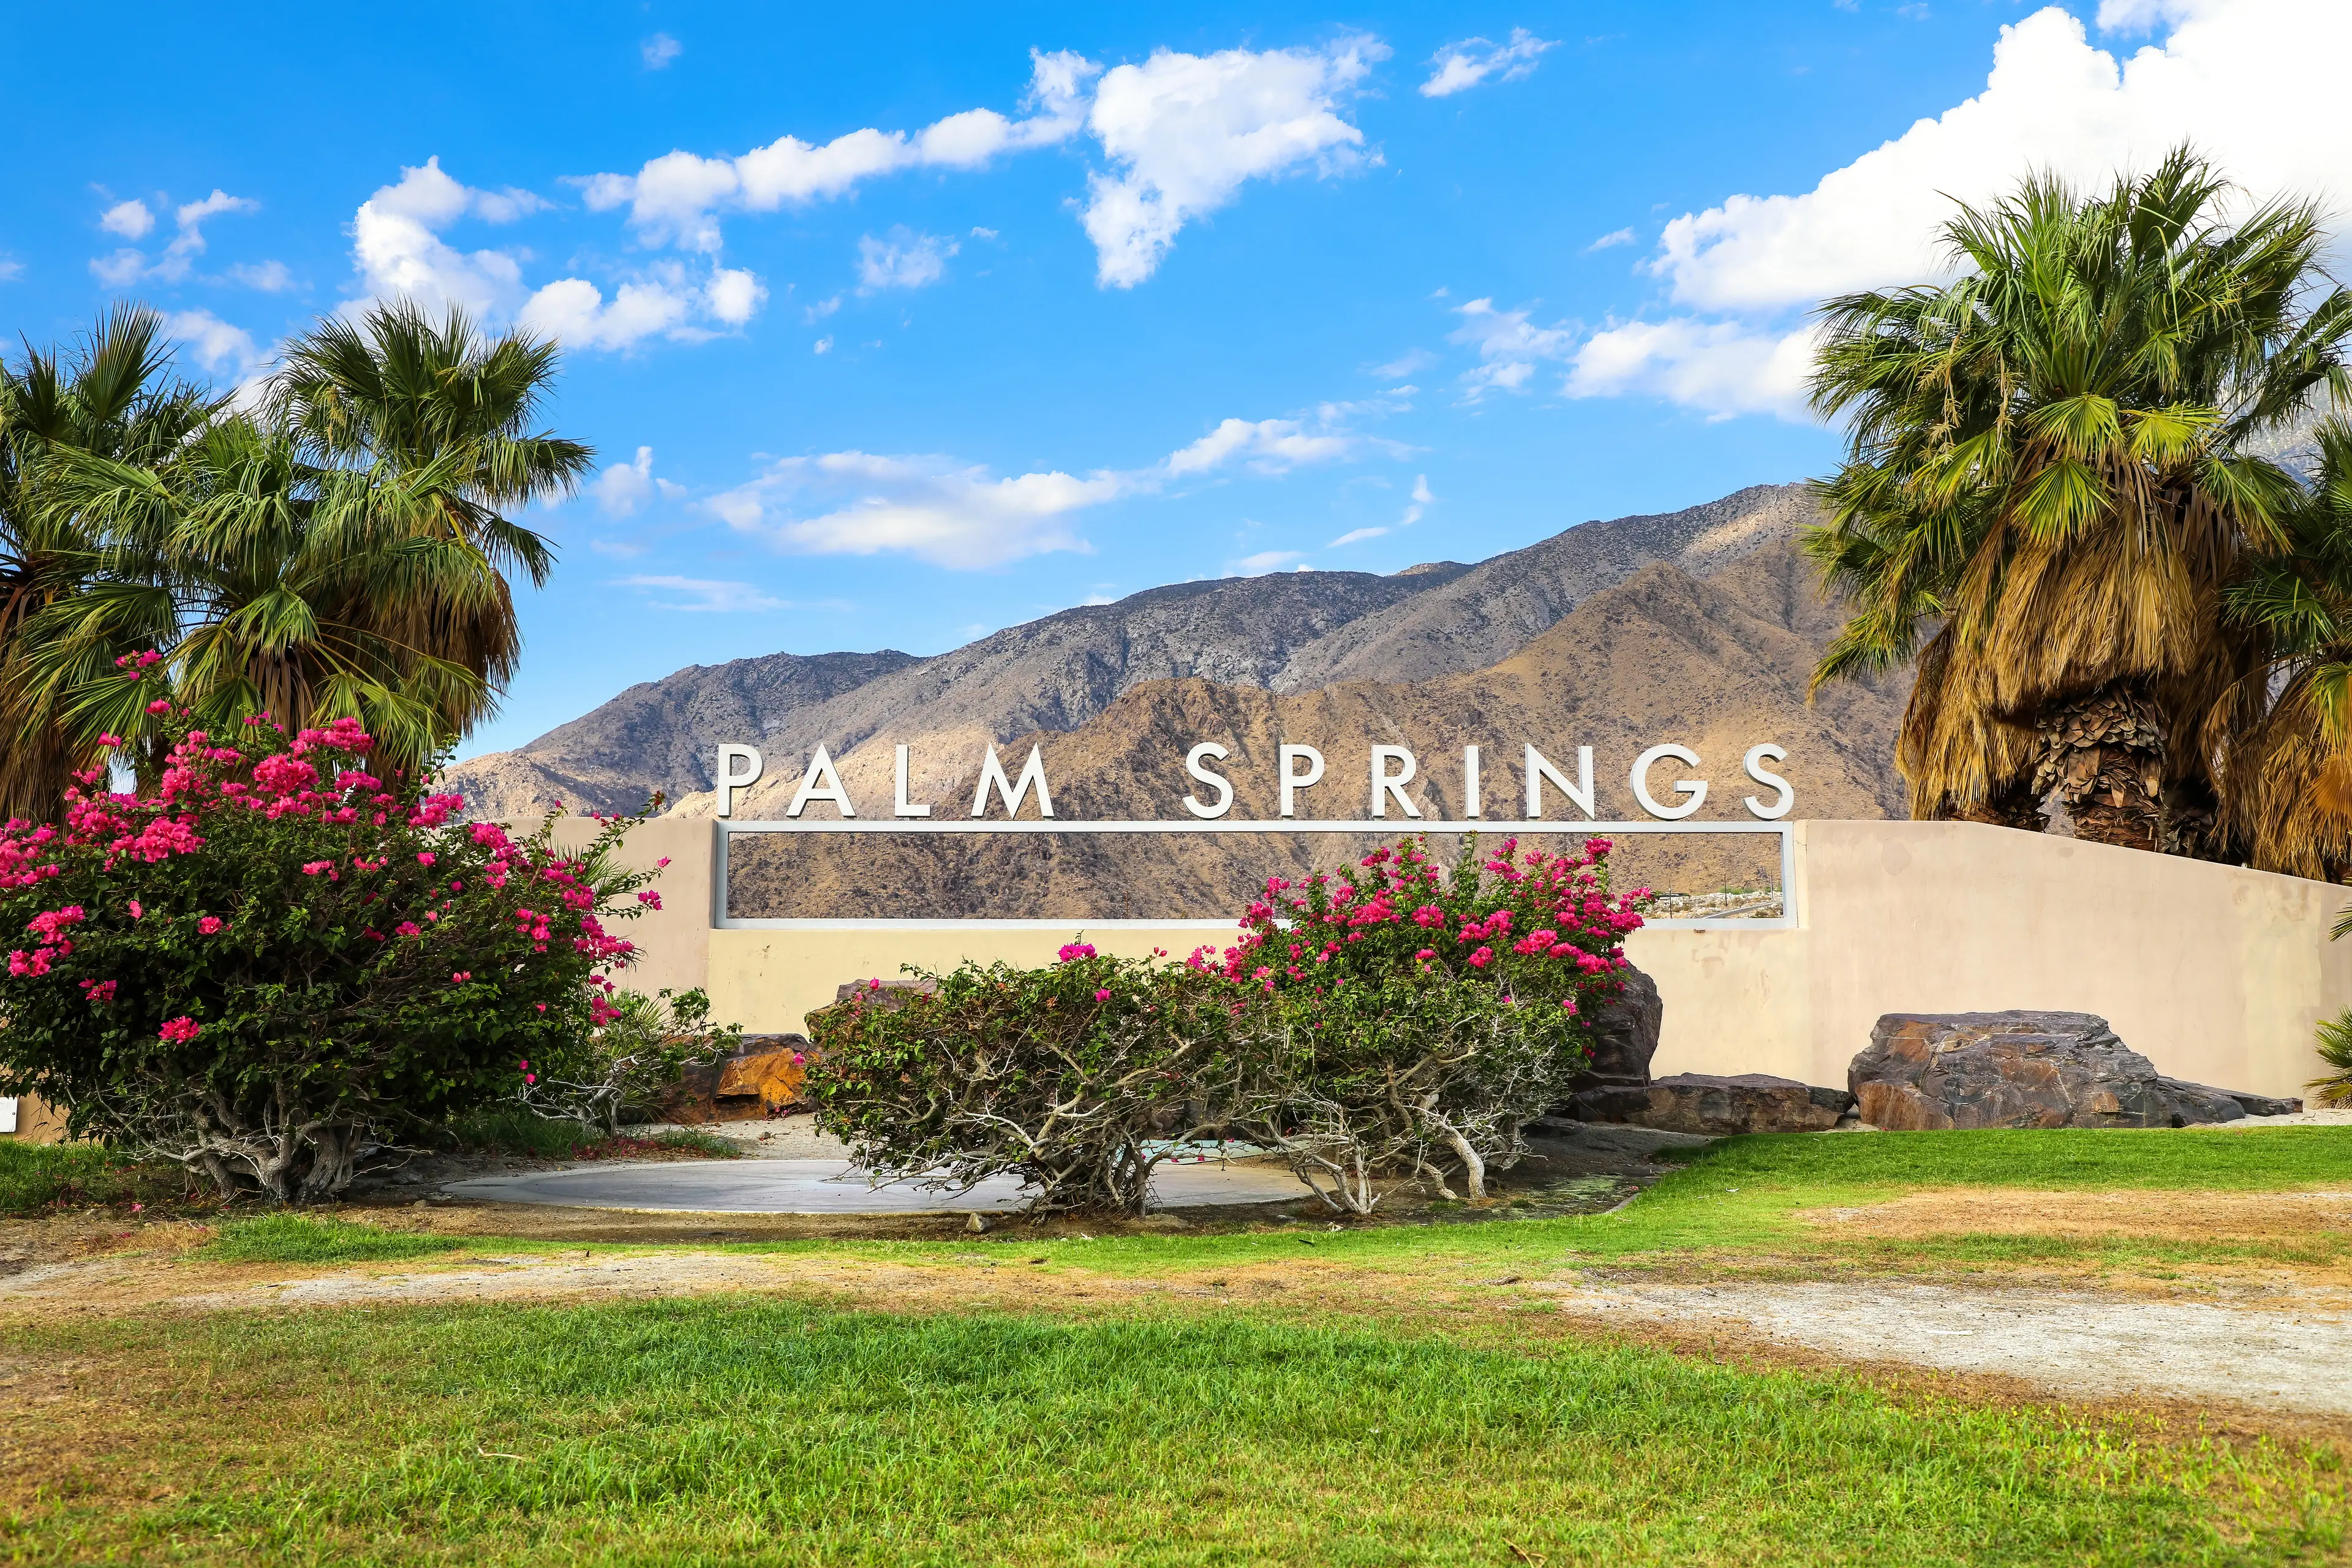 3-Day Solo Adventure: Outdoor Activities & Sightseeing in Palm Springs